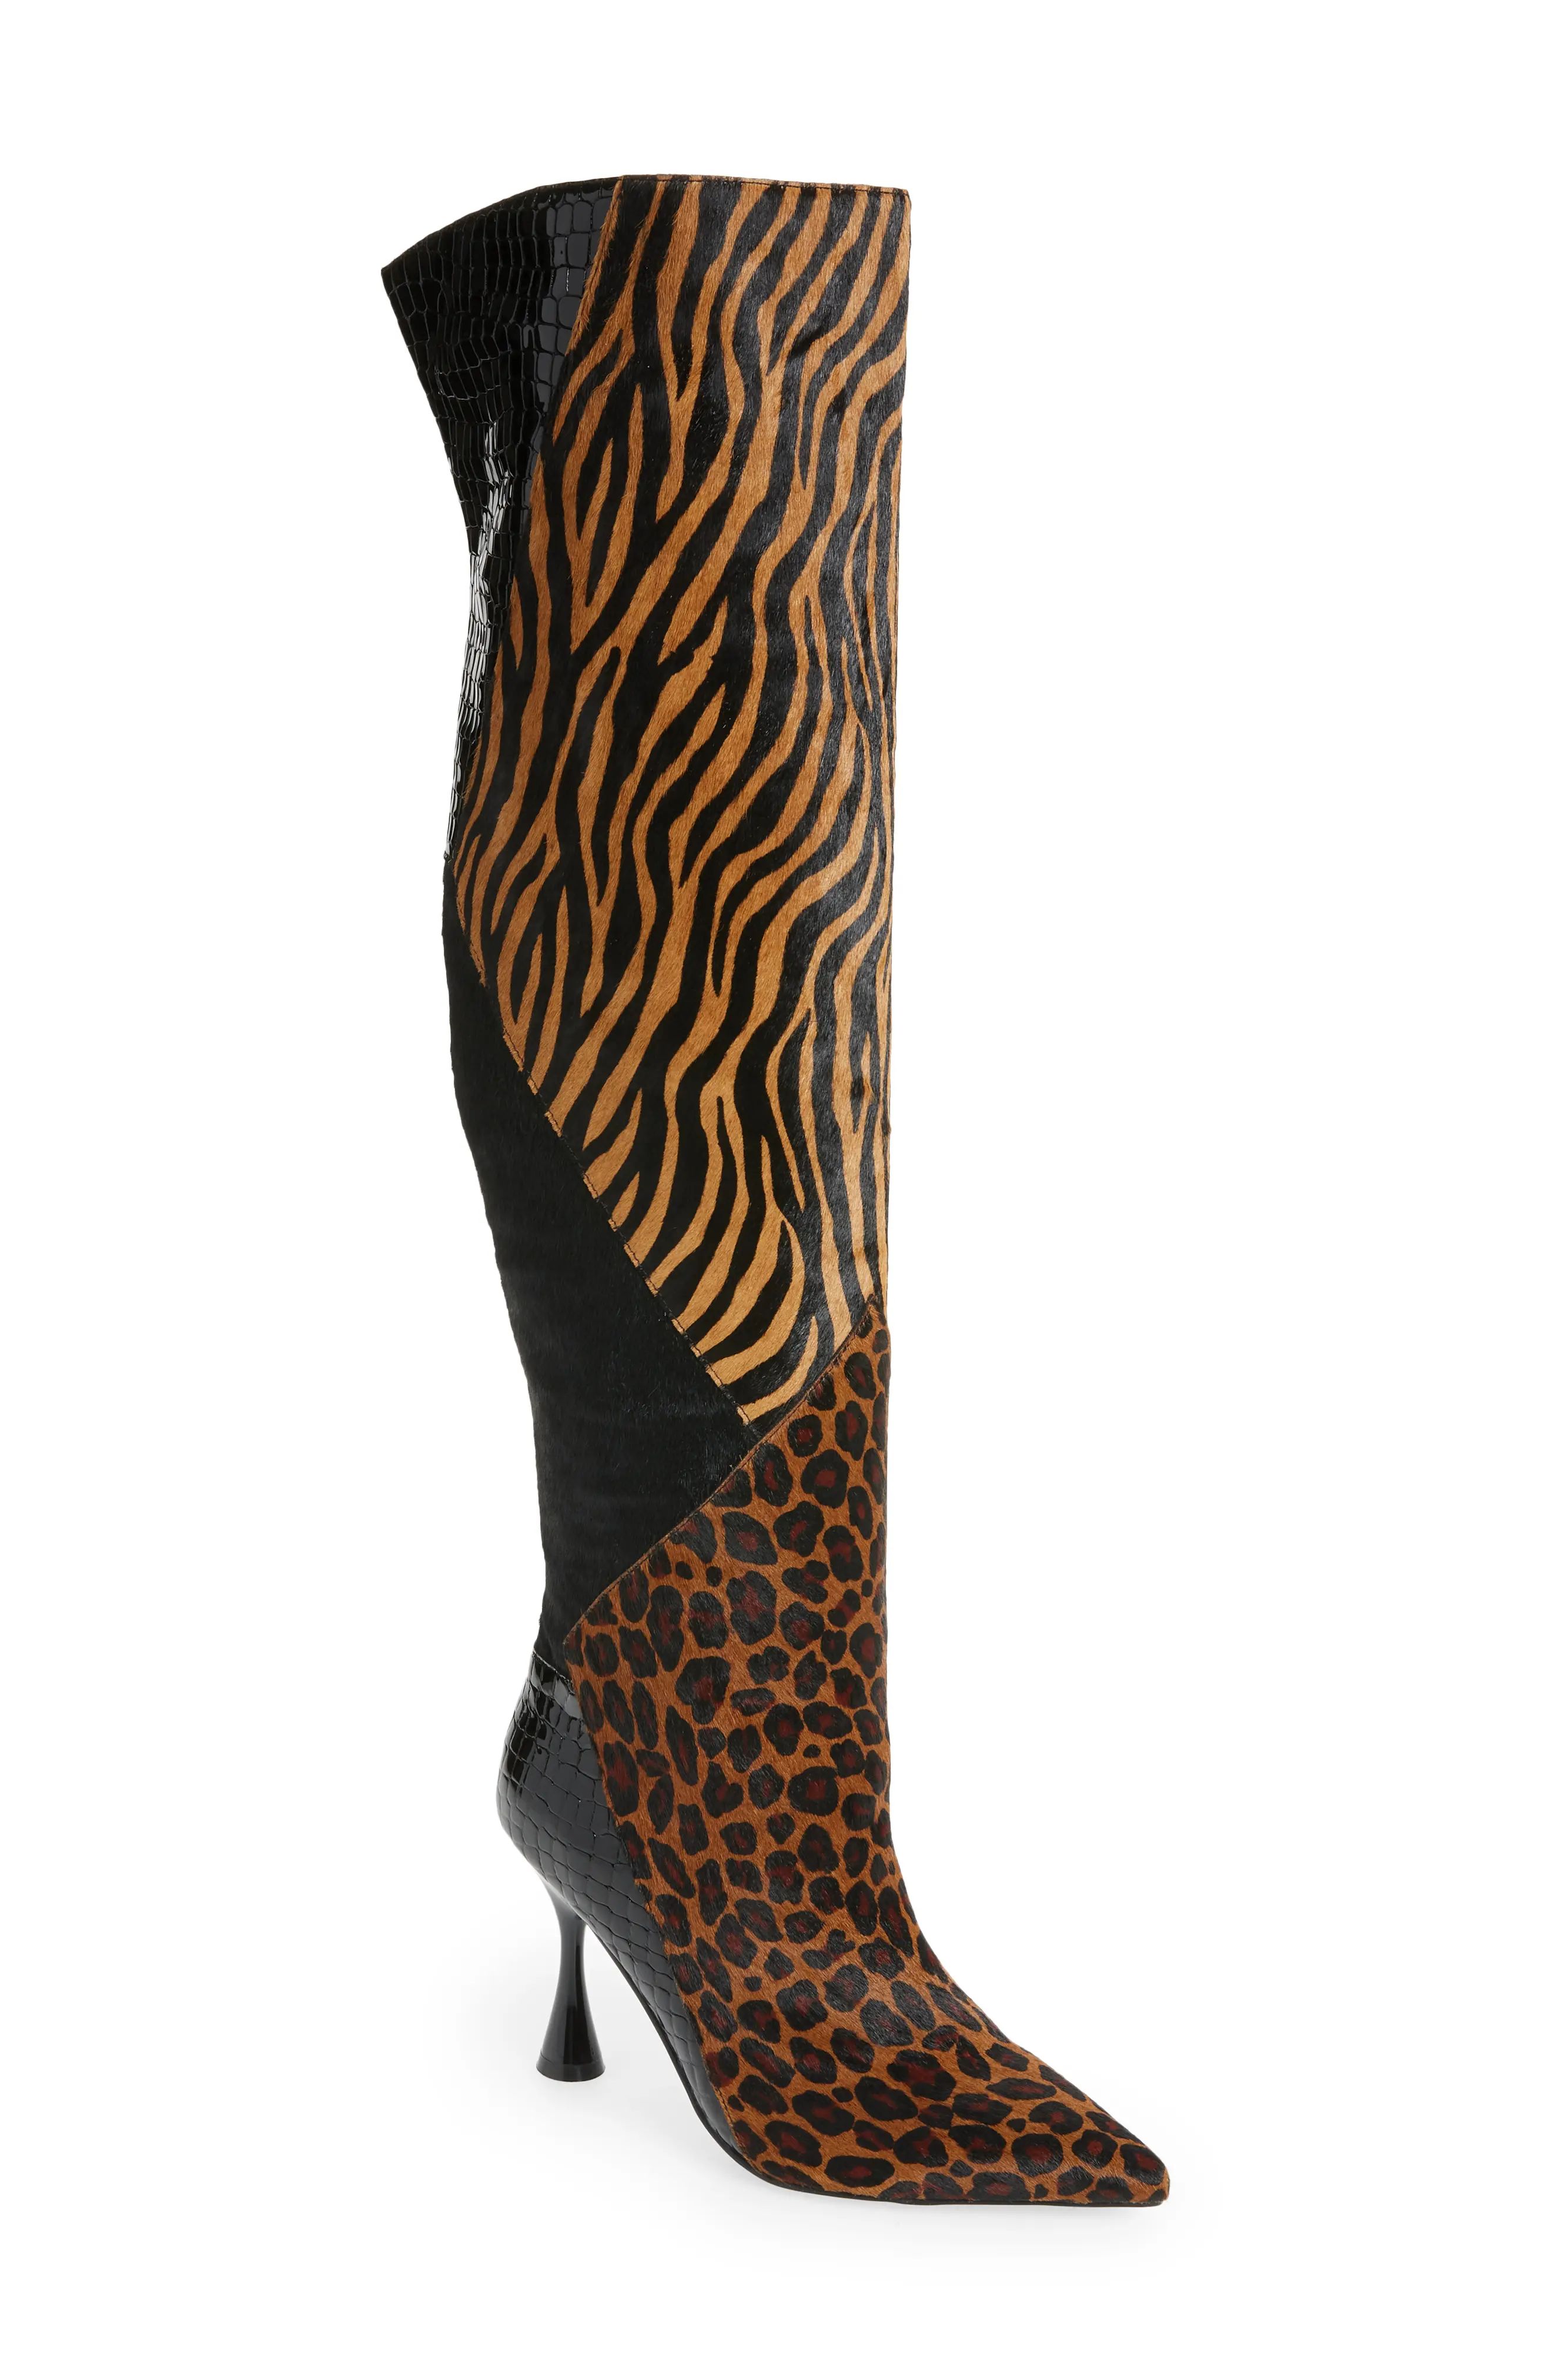 Jeffrey Campbell Man-Eater Over the Knee Genuine Calf Hair Boot, Size 6 in Brown Exotic Multi Calf H | Nordstrom